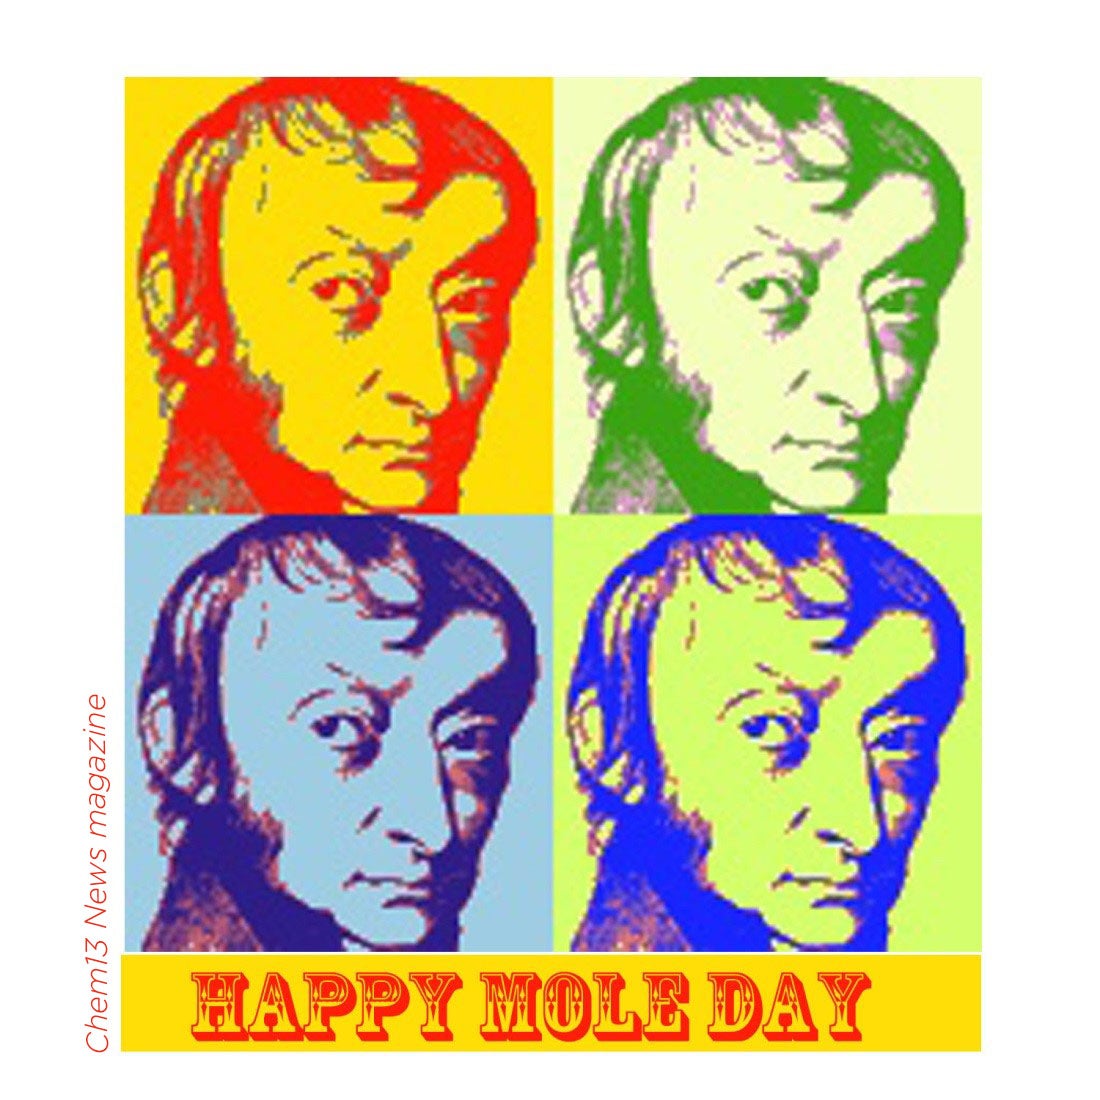 Popart of Avogadro with a Happy Mole Day greeting